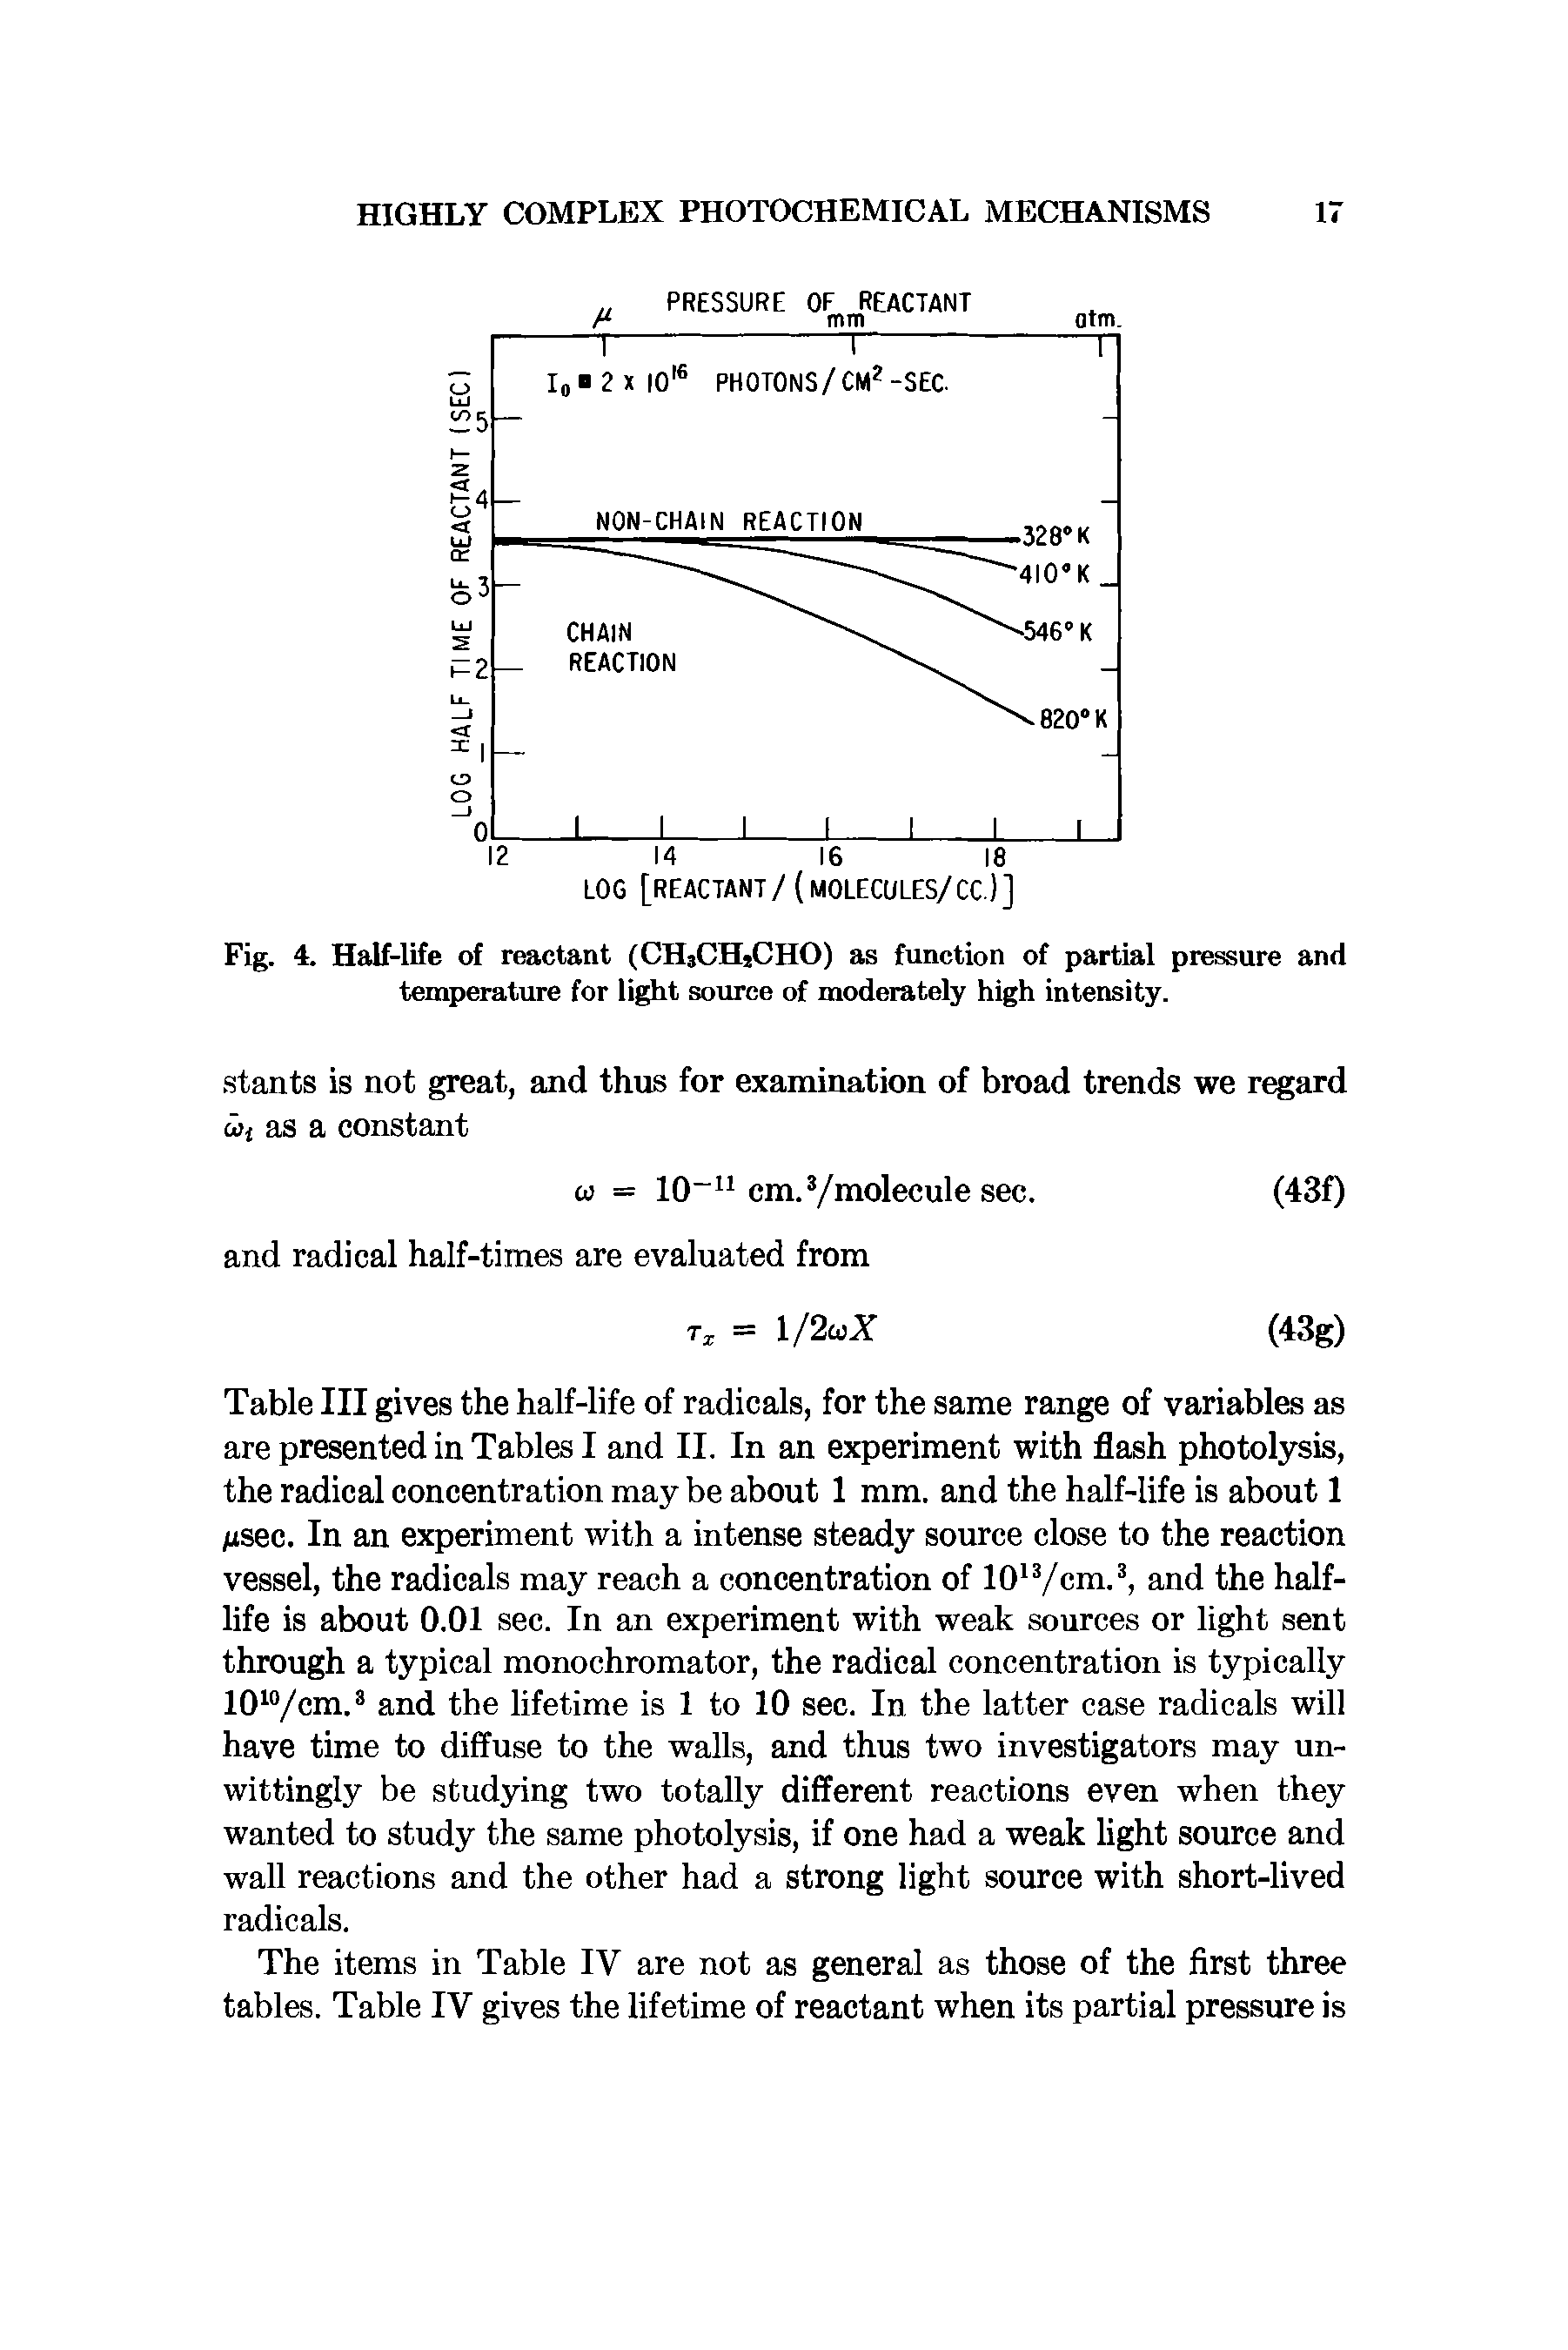 Table III gives the half-life of radicals, for the same range of variables as are presented in Tables I and II. In an experiment with flash photolysis, the radical concentration may be about 1 mm. and the half-life is about 1 iMsec. In an experiment with a intense steady source close to the reaction vessel, the radicals may reach a concentration of lO Ycm. and the half-life is about 0.01 sec. In an experiment with weak sources or light sent through a typical monochromator, the radical concentration is typically 10 /cm. and the lifetime is 1 to 10 sec. In the latter case radicals will have time to diffuse to the walls, and thus two investigators may unwittingly be studying two totally different reactions even when they wanted to study the same photolysis, if one had a weak light source and wall reactions and the other had a strong light source with short-lived radicals.